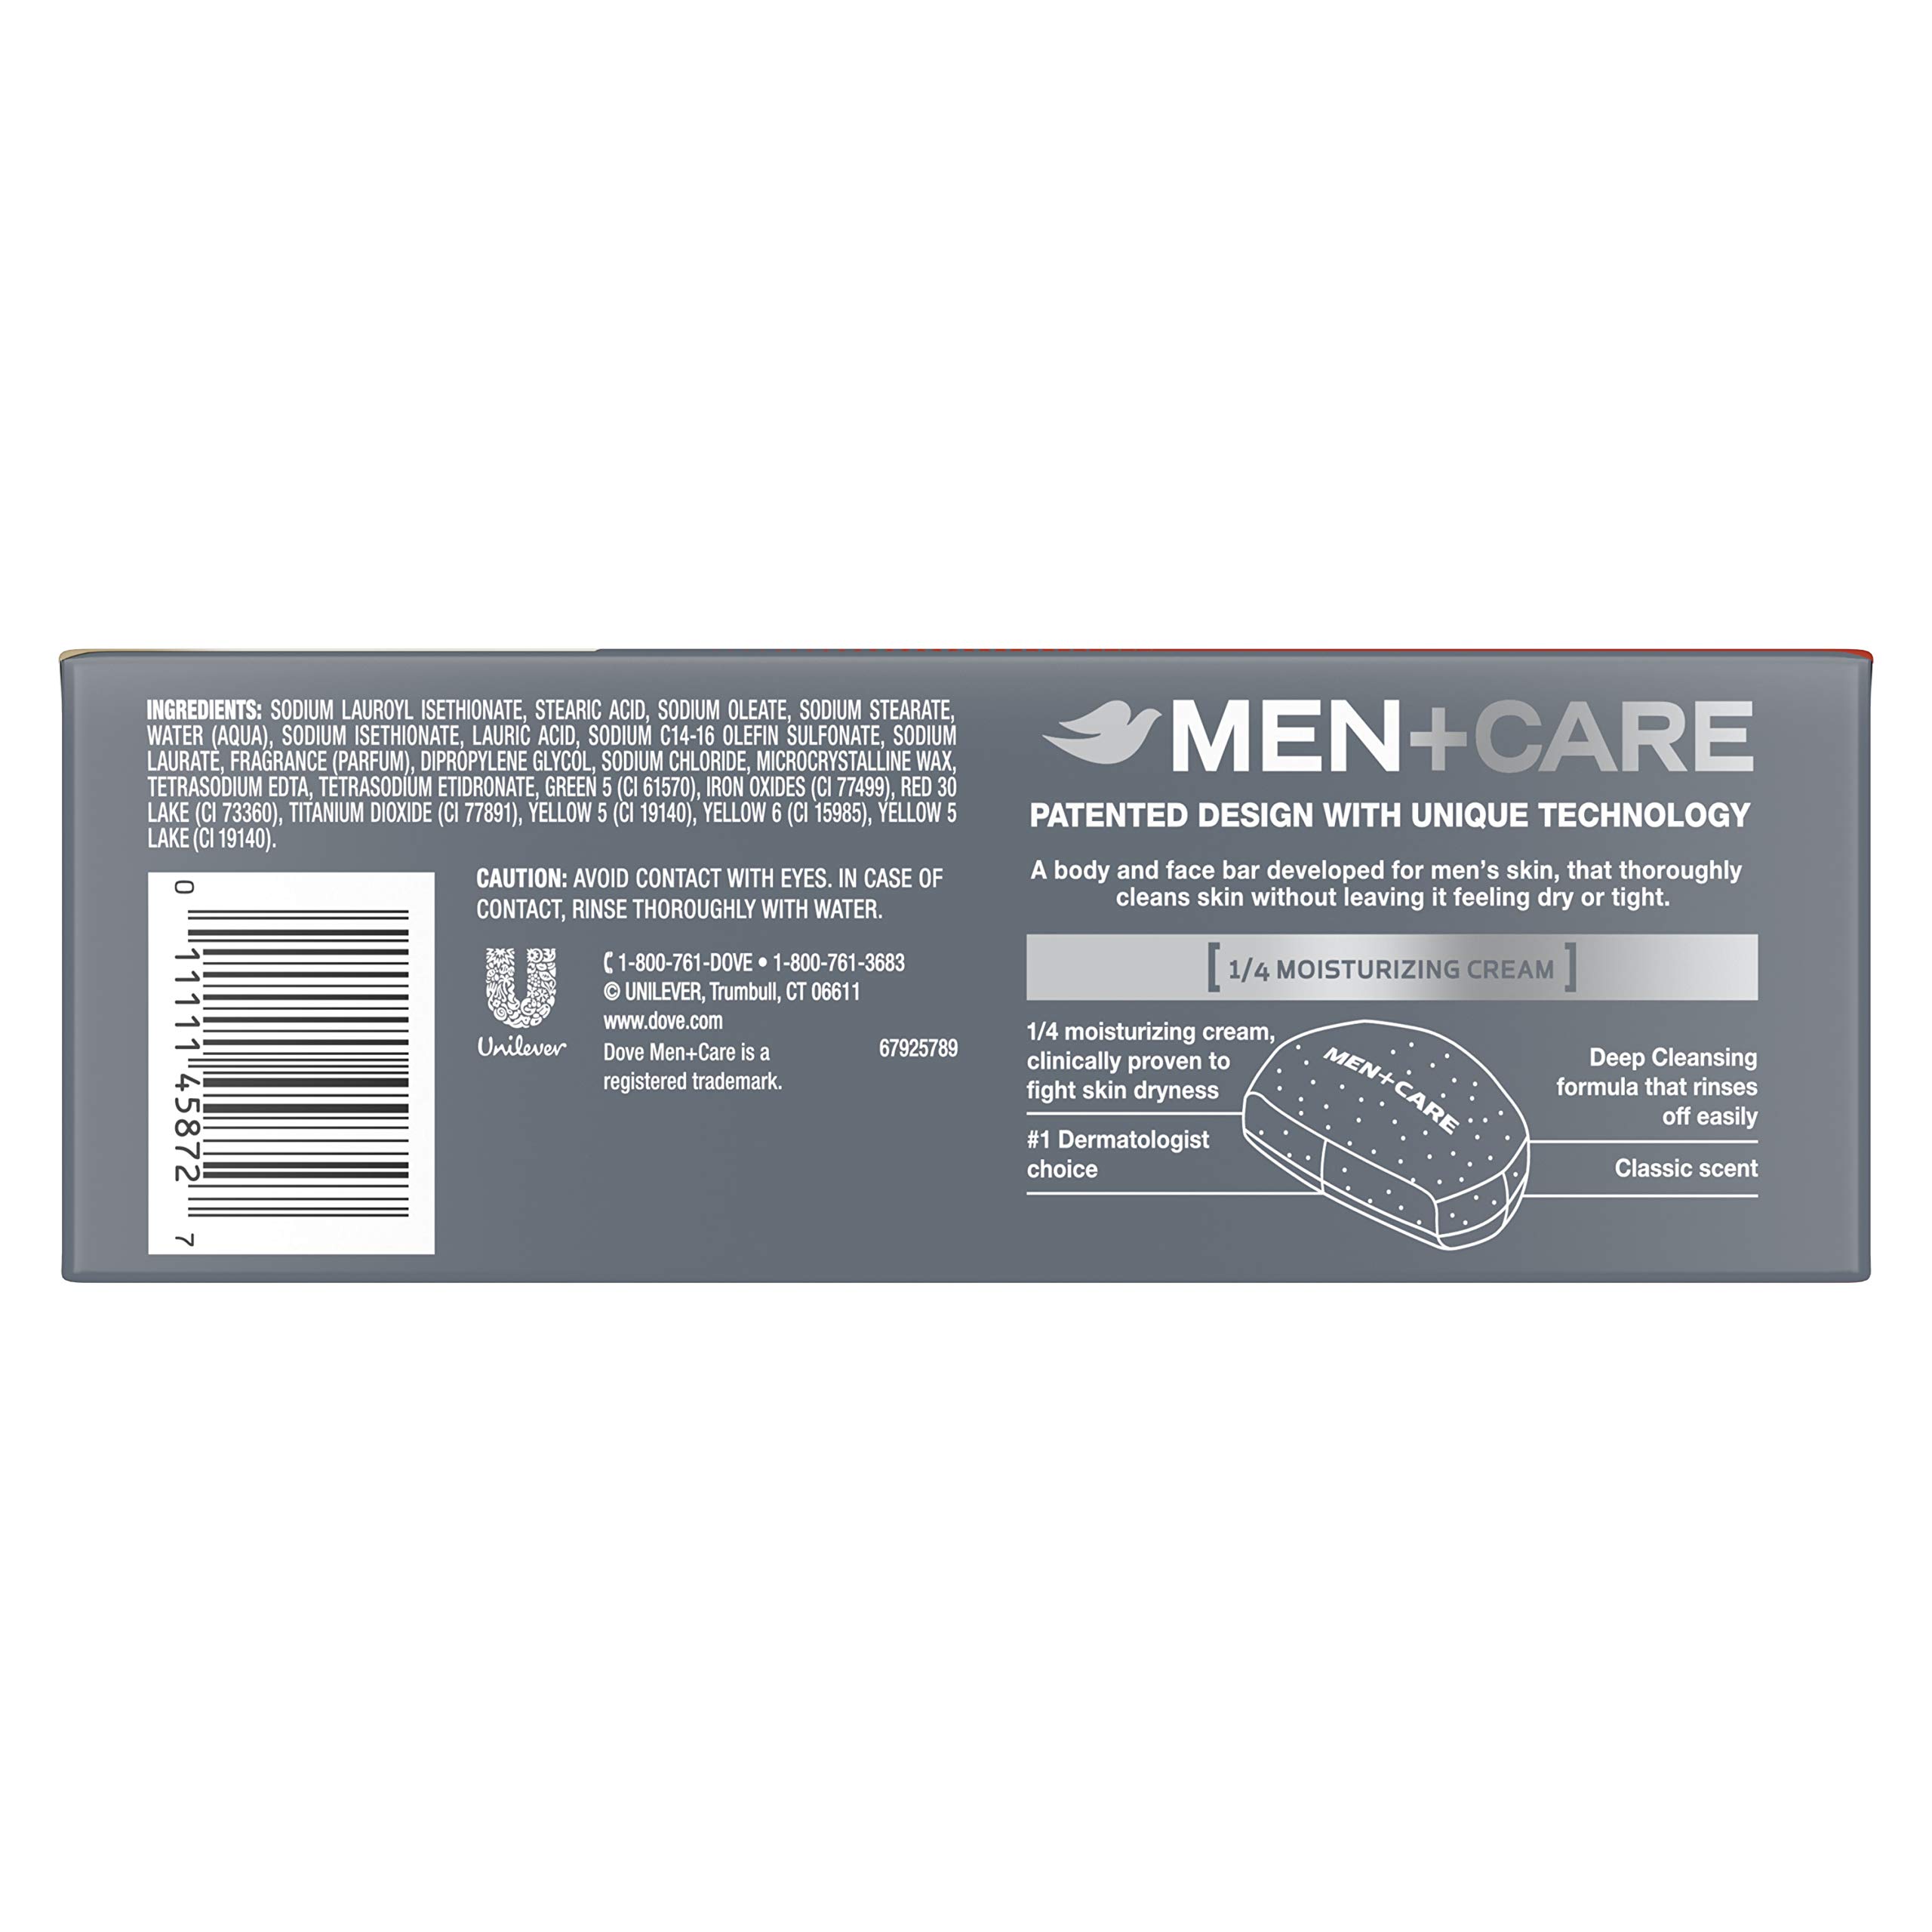 Dove Men+Care Men's Bar Soap More Moisturizing Than Bar Soap Deep Clean Soap Bar that Effectively Washes Away Bacteria, Nourishes Your Skin 3.75 oz 10 Bars,10 Count(Pack of 1)